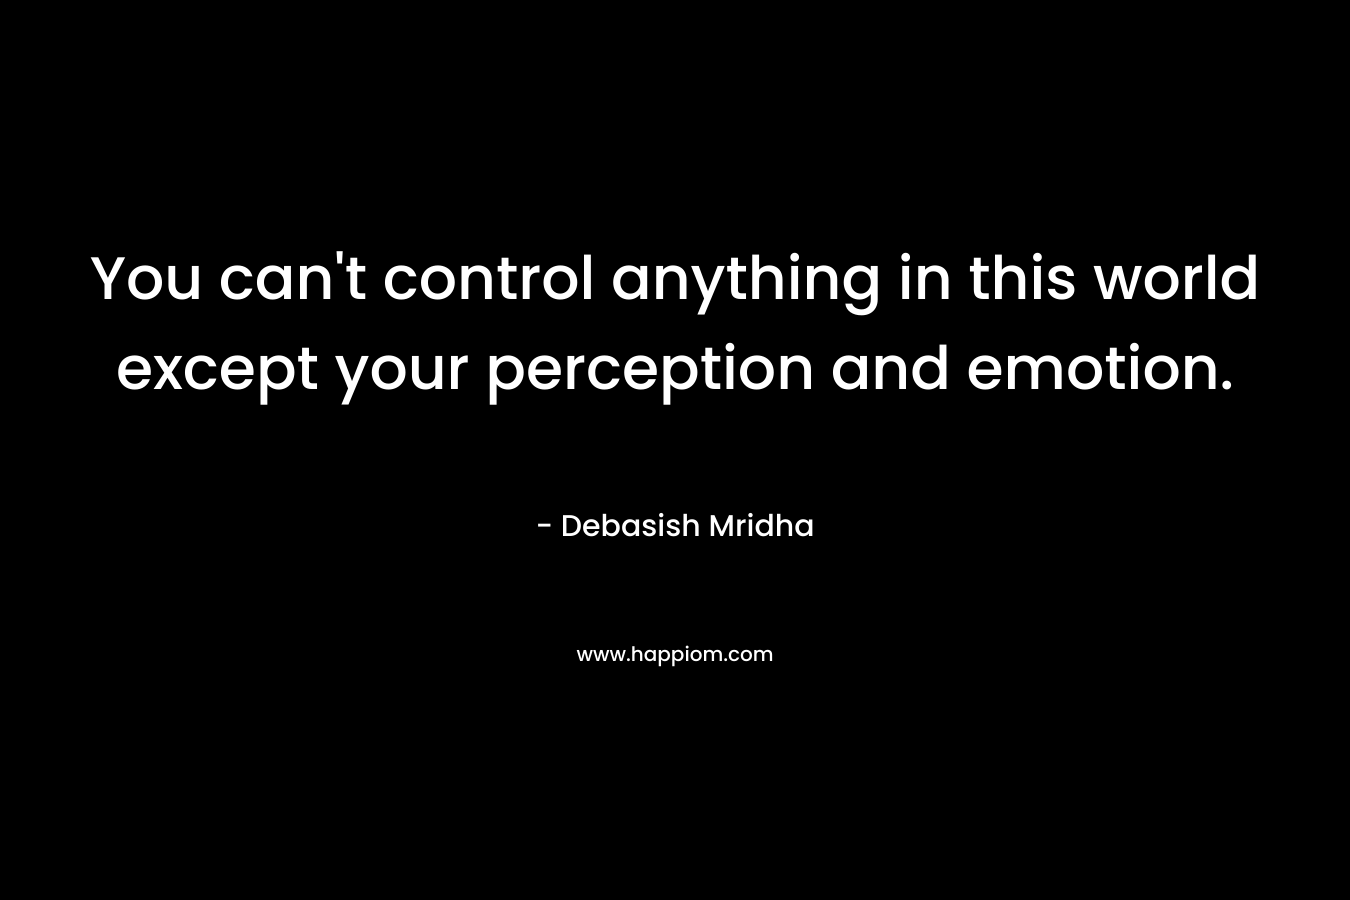 You can't control anything in this world except your perception and emotion.